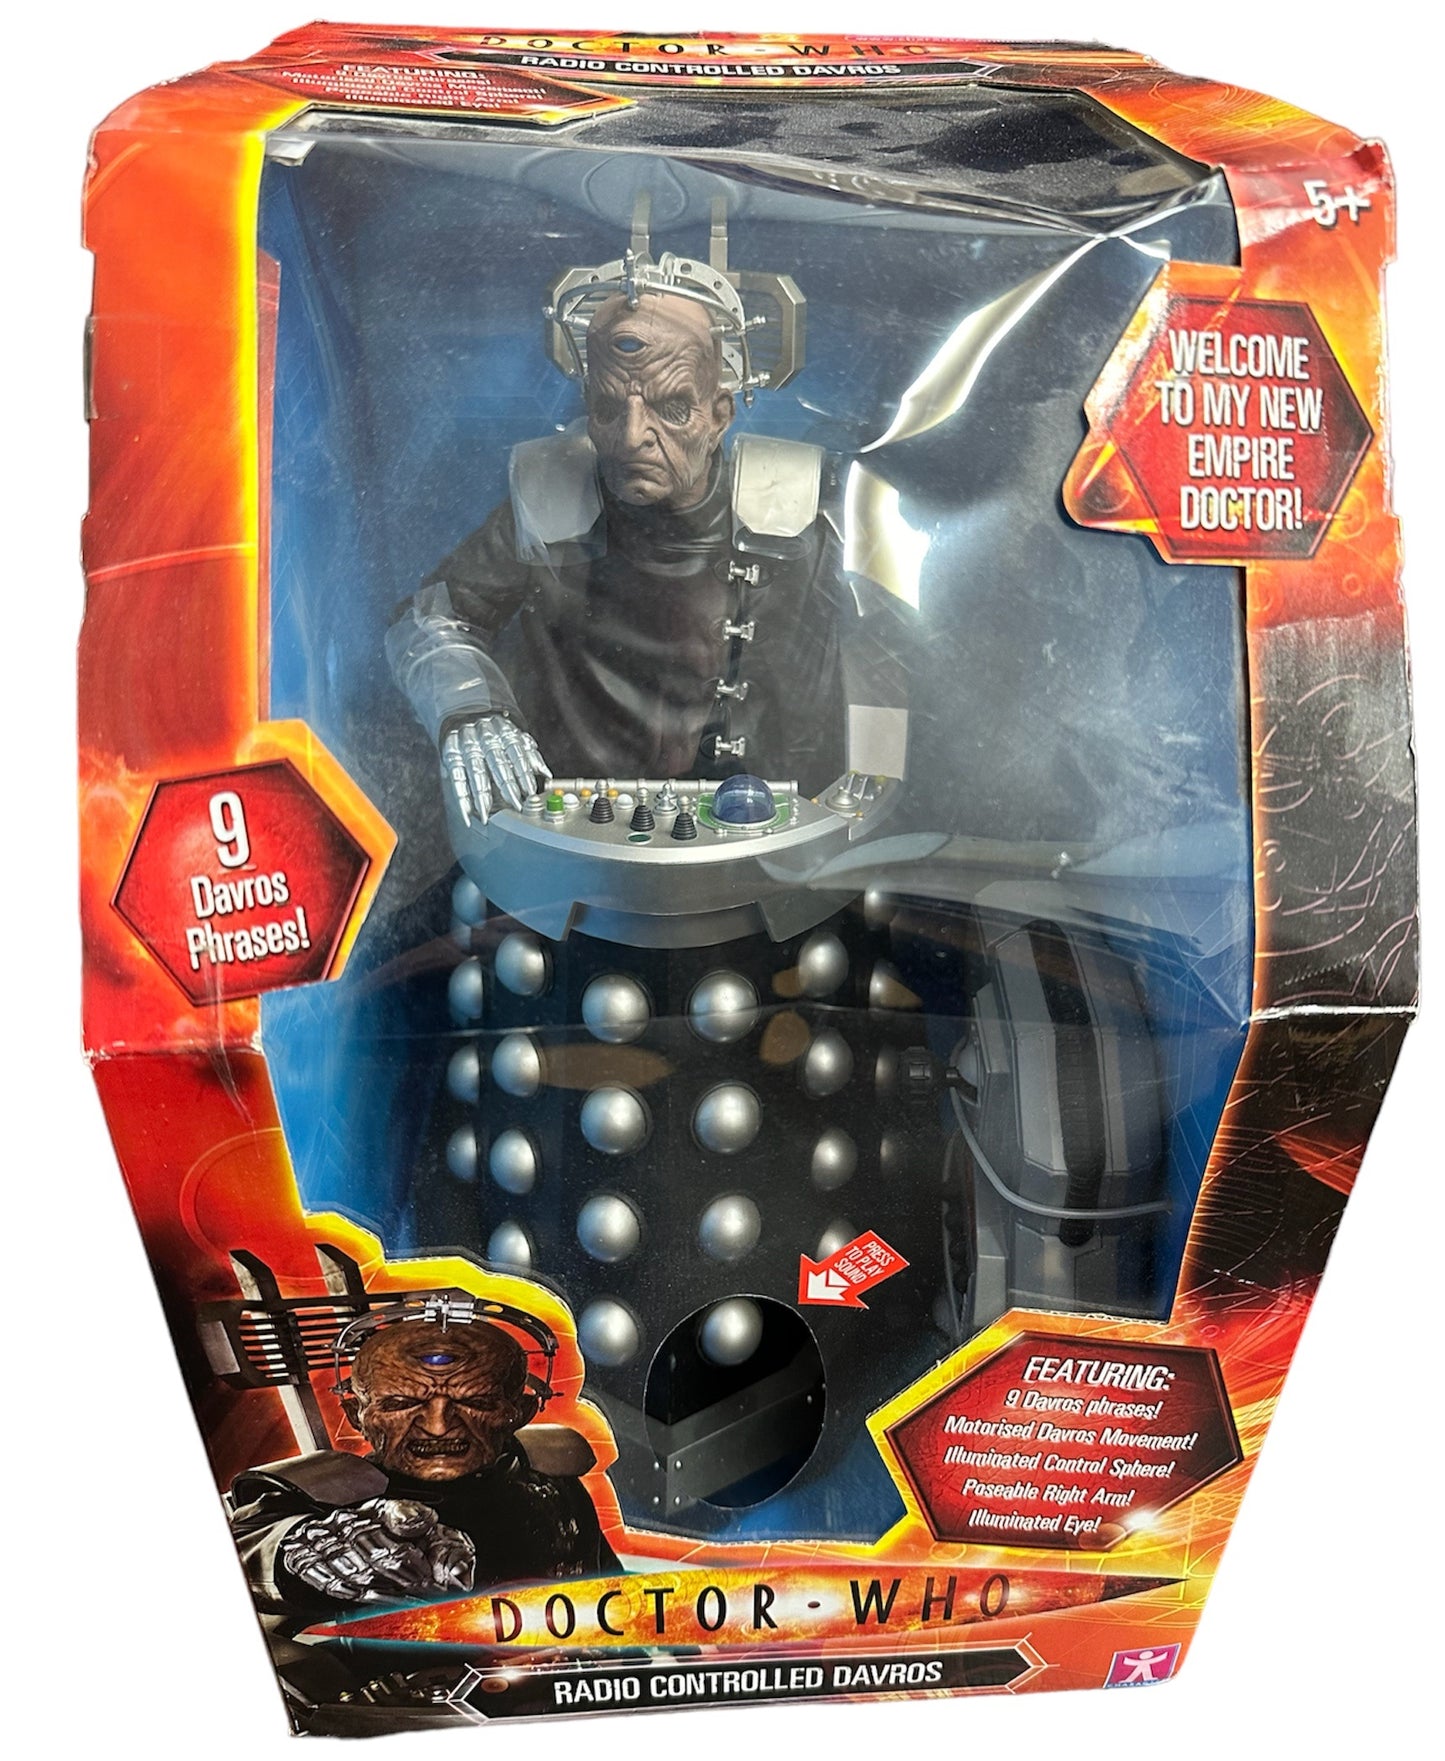 Vintage 2008 Doctor Dr Who 12 Inch Electronic Radio Controlled Talking Davros Collectors Action Figure - Factory Sealed Shop Stock Room Find